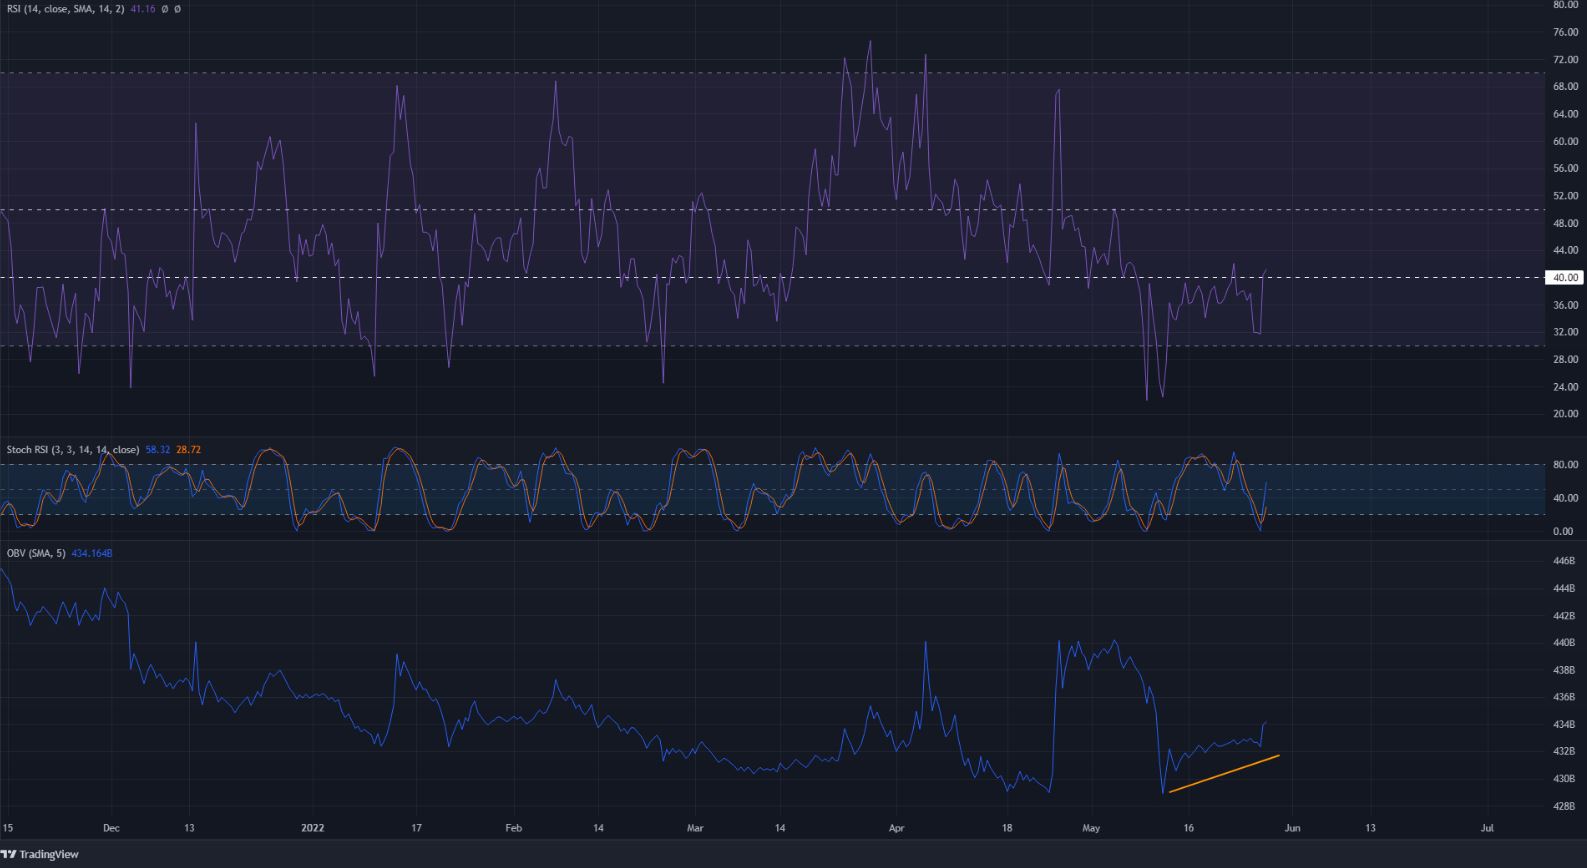 Dogecoin exhibits a bullish divergence, but can the buyers really force a trend reversal?